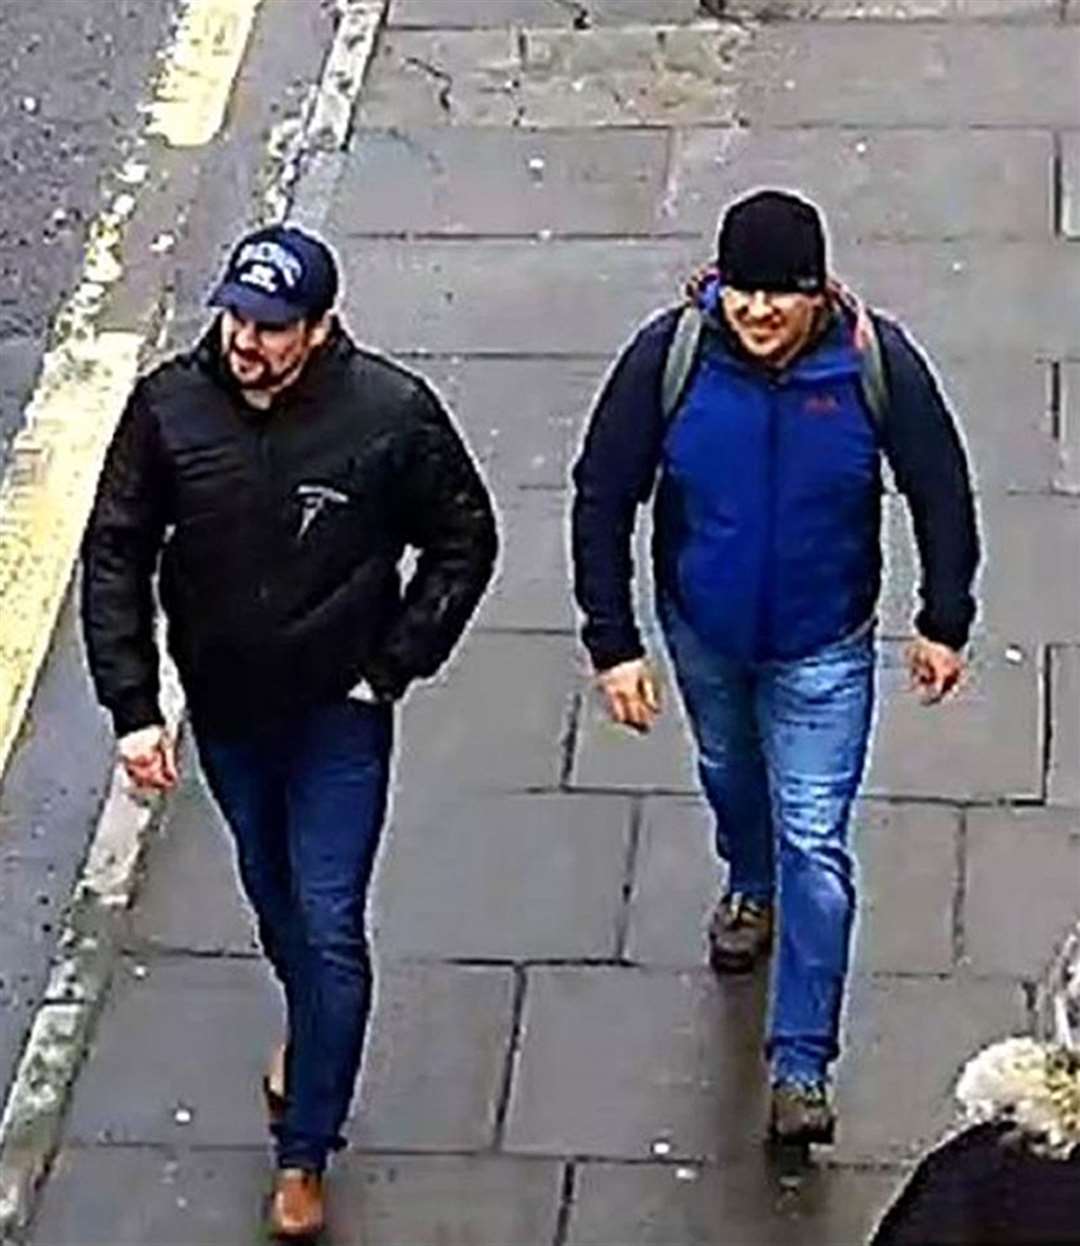 Russian nationals Ruslan Boshirov and Alexander Petrov are accused of carrying out the nerve agent attack (Metropolitan Police/PA)